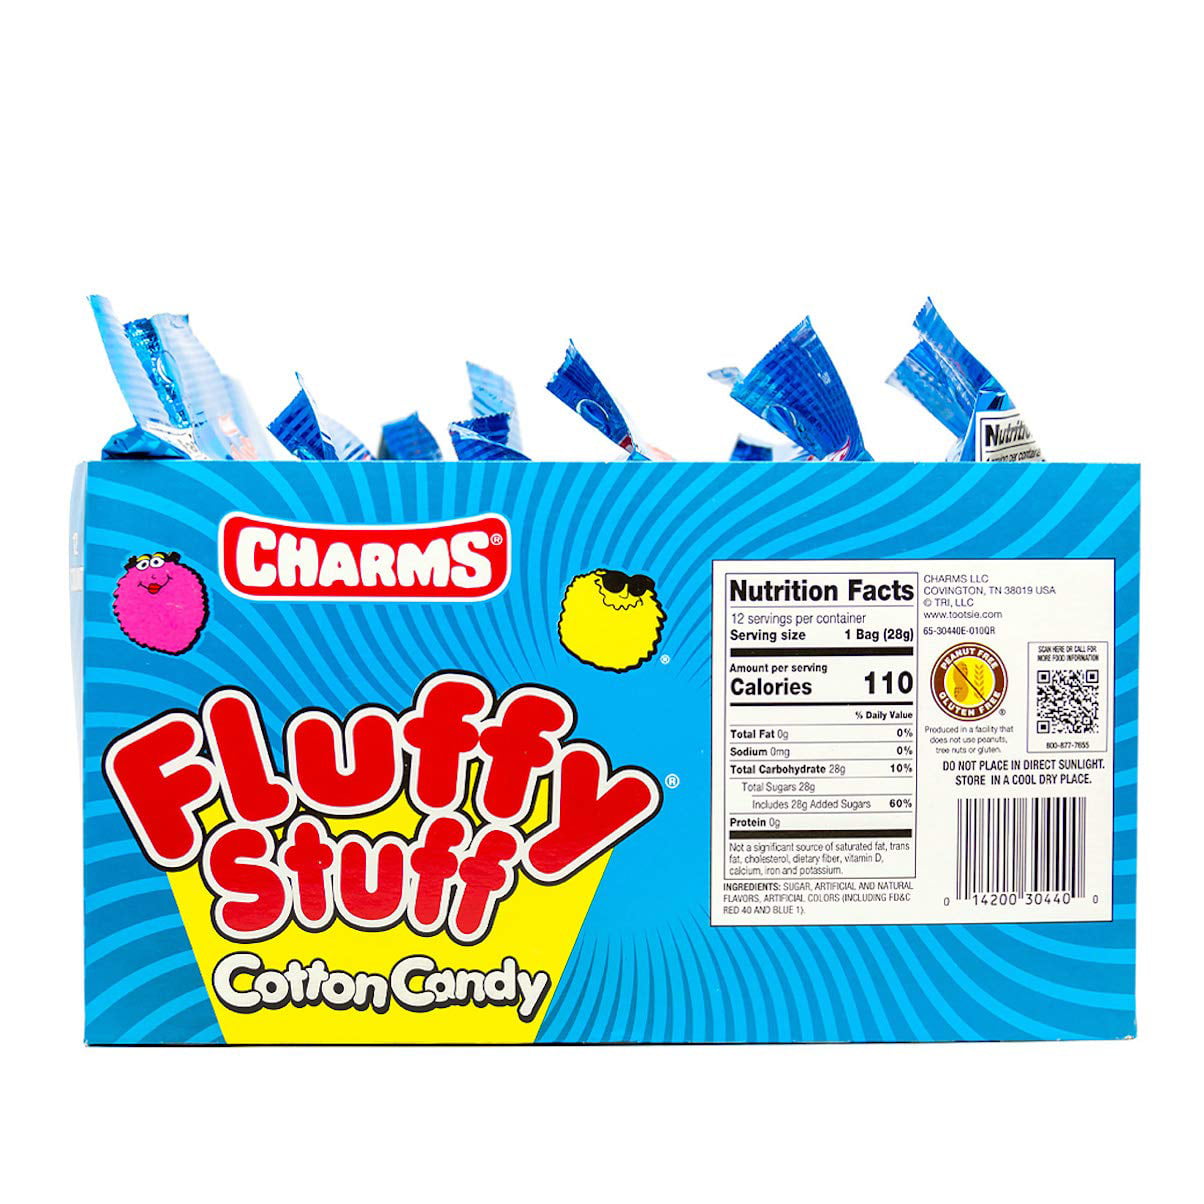 Fluffy Stuff Cotton Candy Bag, 2.5 oz, 12 Count –